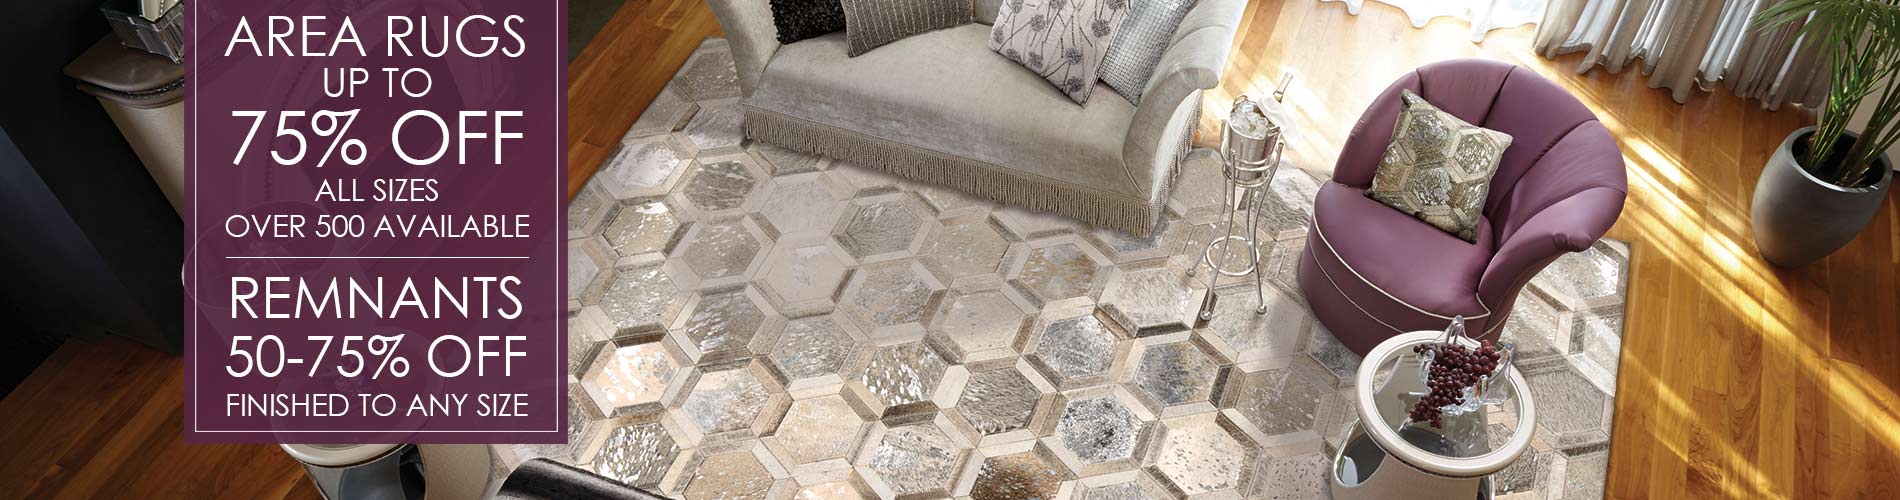 area rugs up to 75% off all sizes  over 500 available  remnants 50 - 75% off  finished to any size